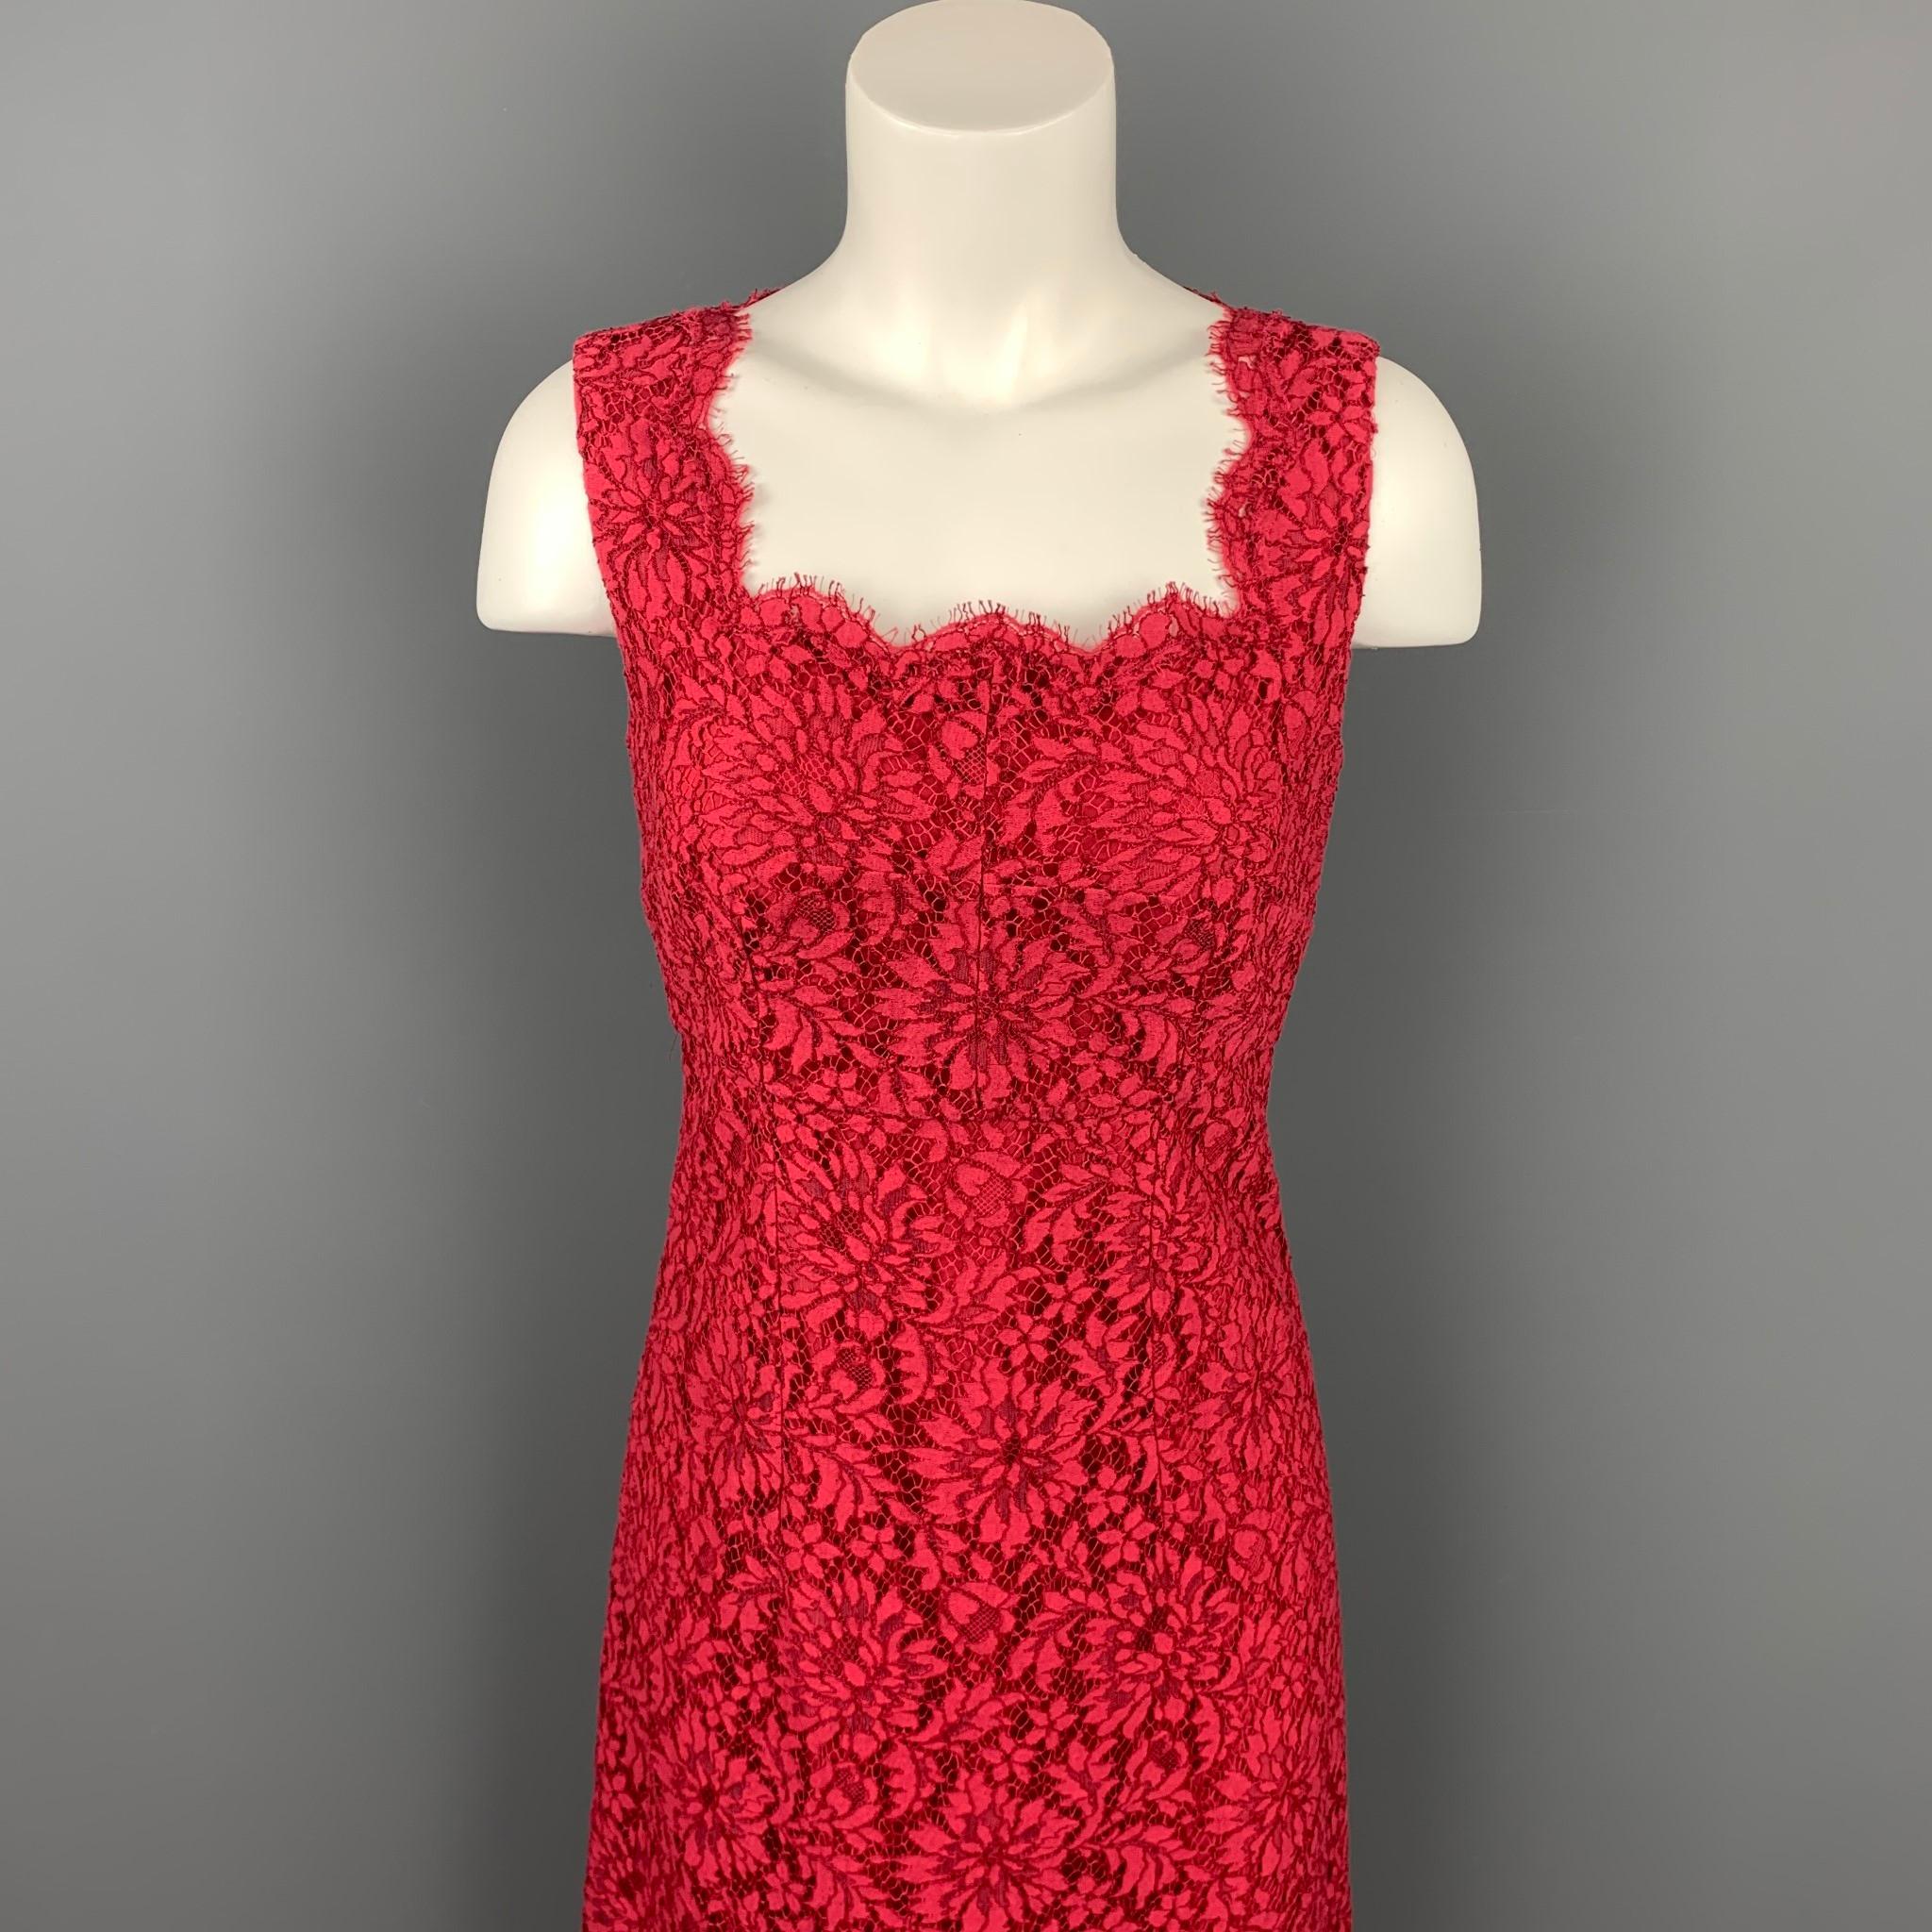 DOLCE & GABBANA dress comes in a red lace material with a silk slip liner featuring a sheathe style, sleeveless, and a back zip up closure. Made in Italy.

Good Pre-Owned Condition.
Marked: No size marked

Measurements:

Shoulder: 14.5 in. 
Bust: 33